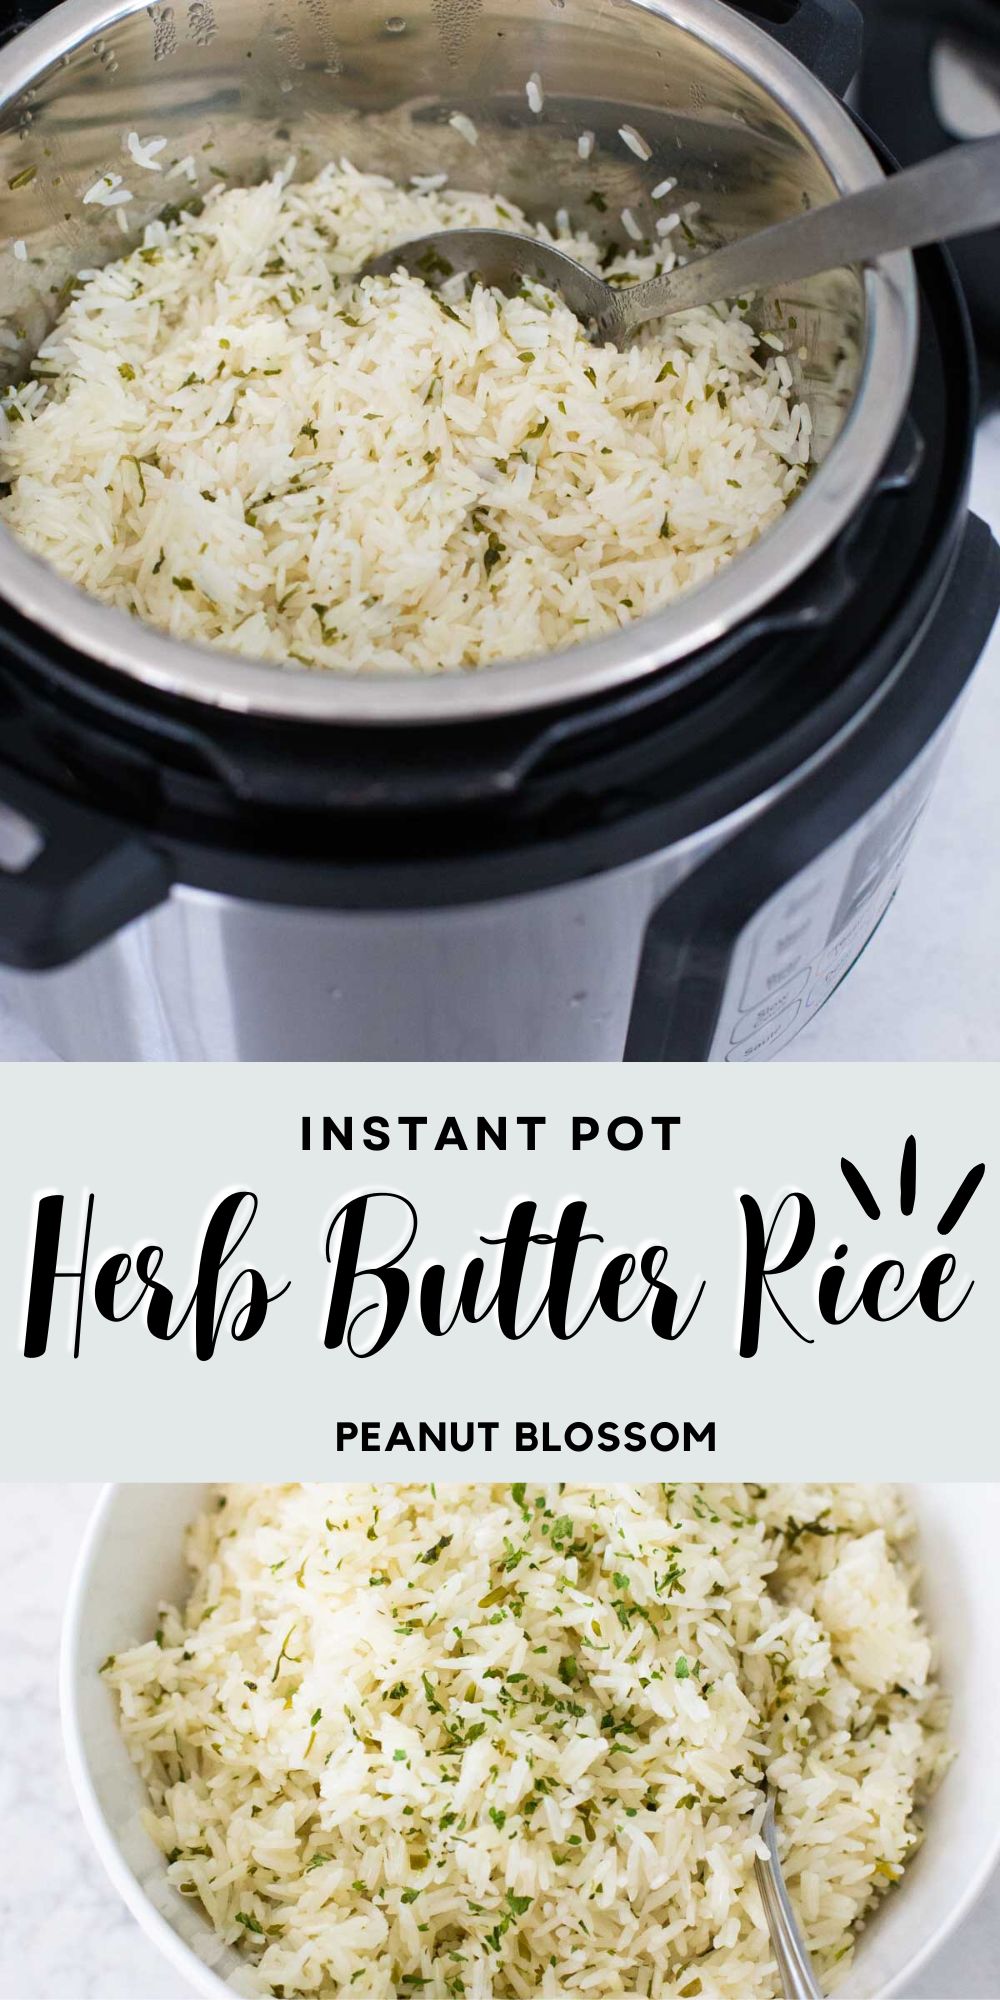 The photo collage shows the herb butter rice in the Instant Pot next to a photo of it being served in a white bowl.